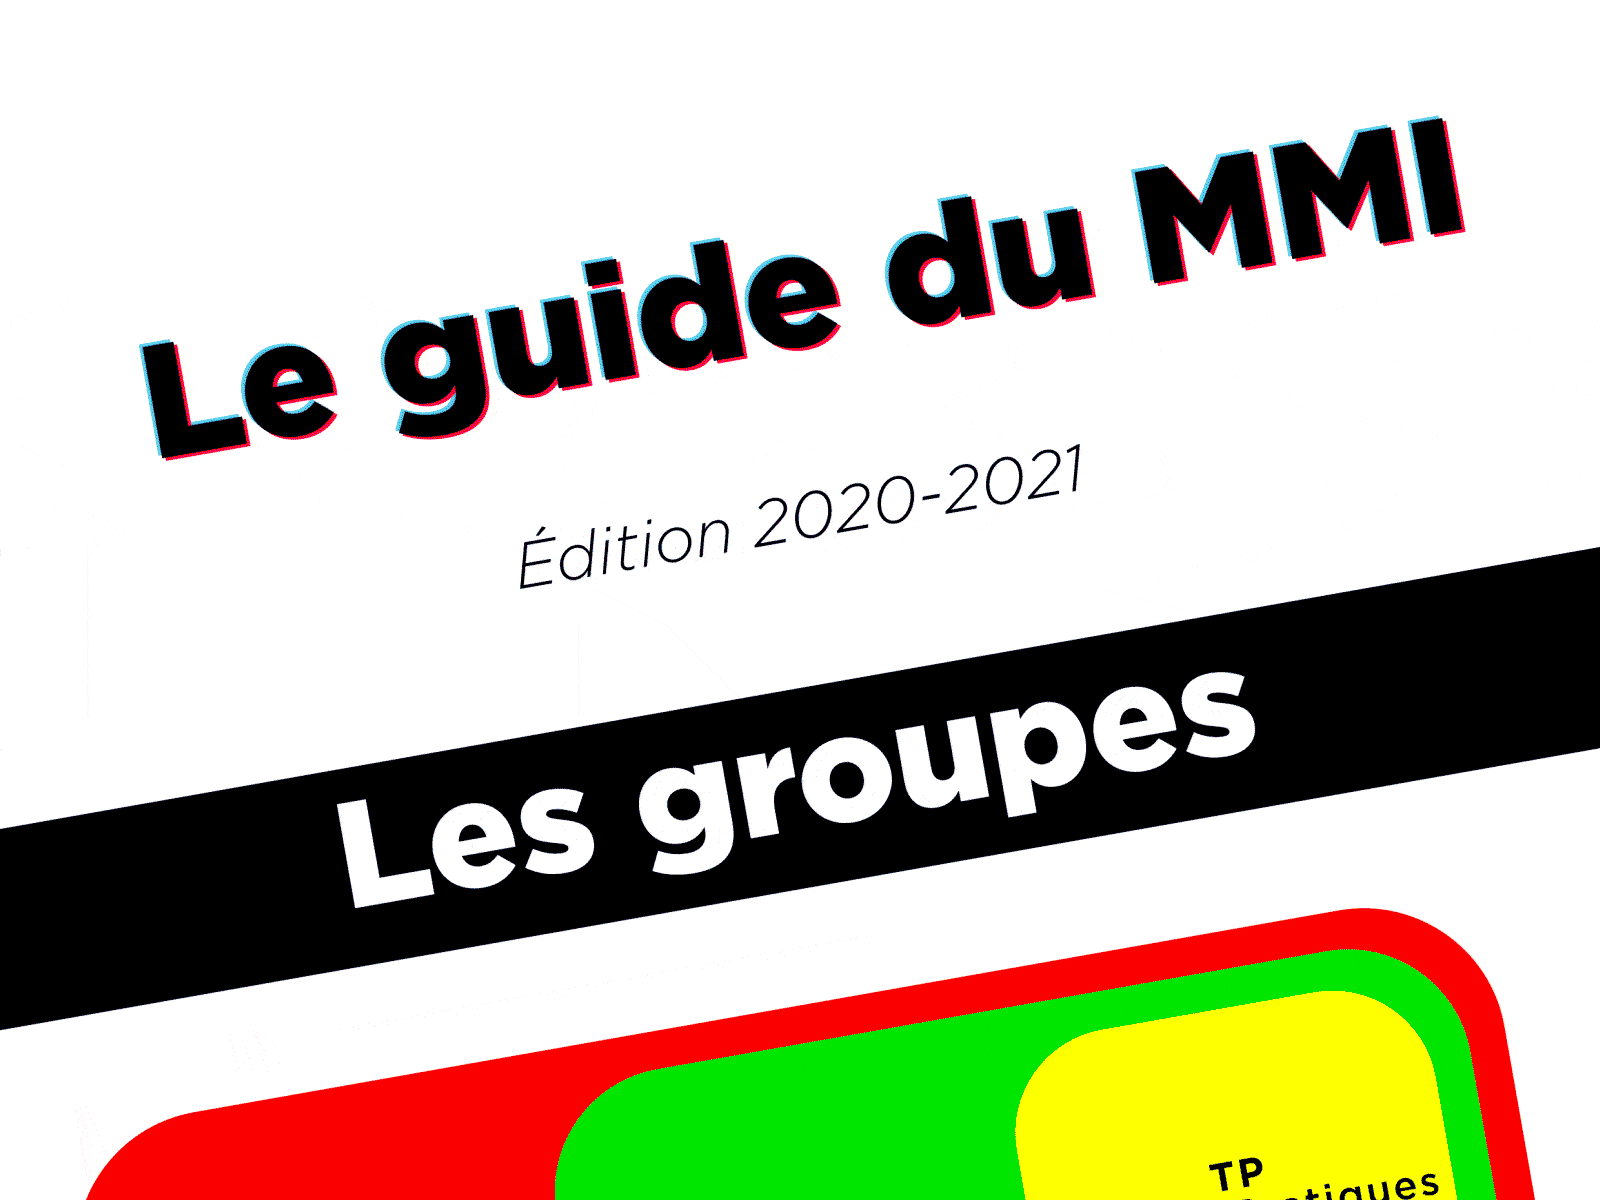 Le guide du MMI affinitydesigner colorful daily dailychallenge dailycreativechallenge design gif illustration infography minimal typography